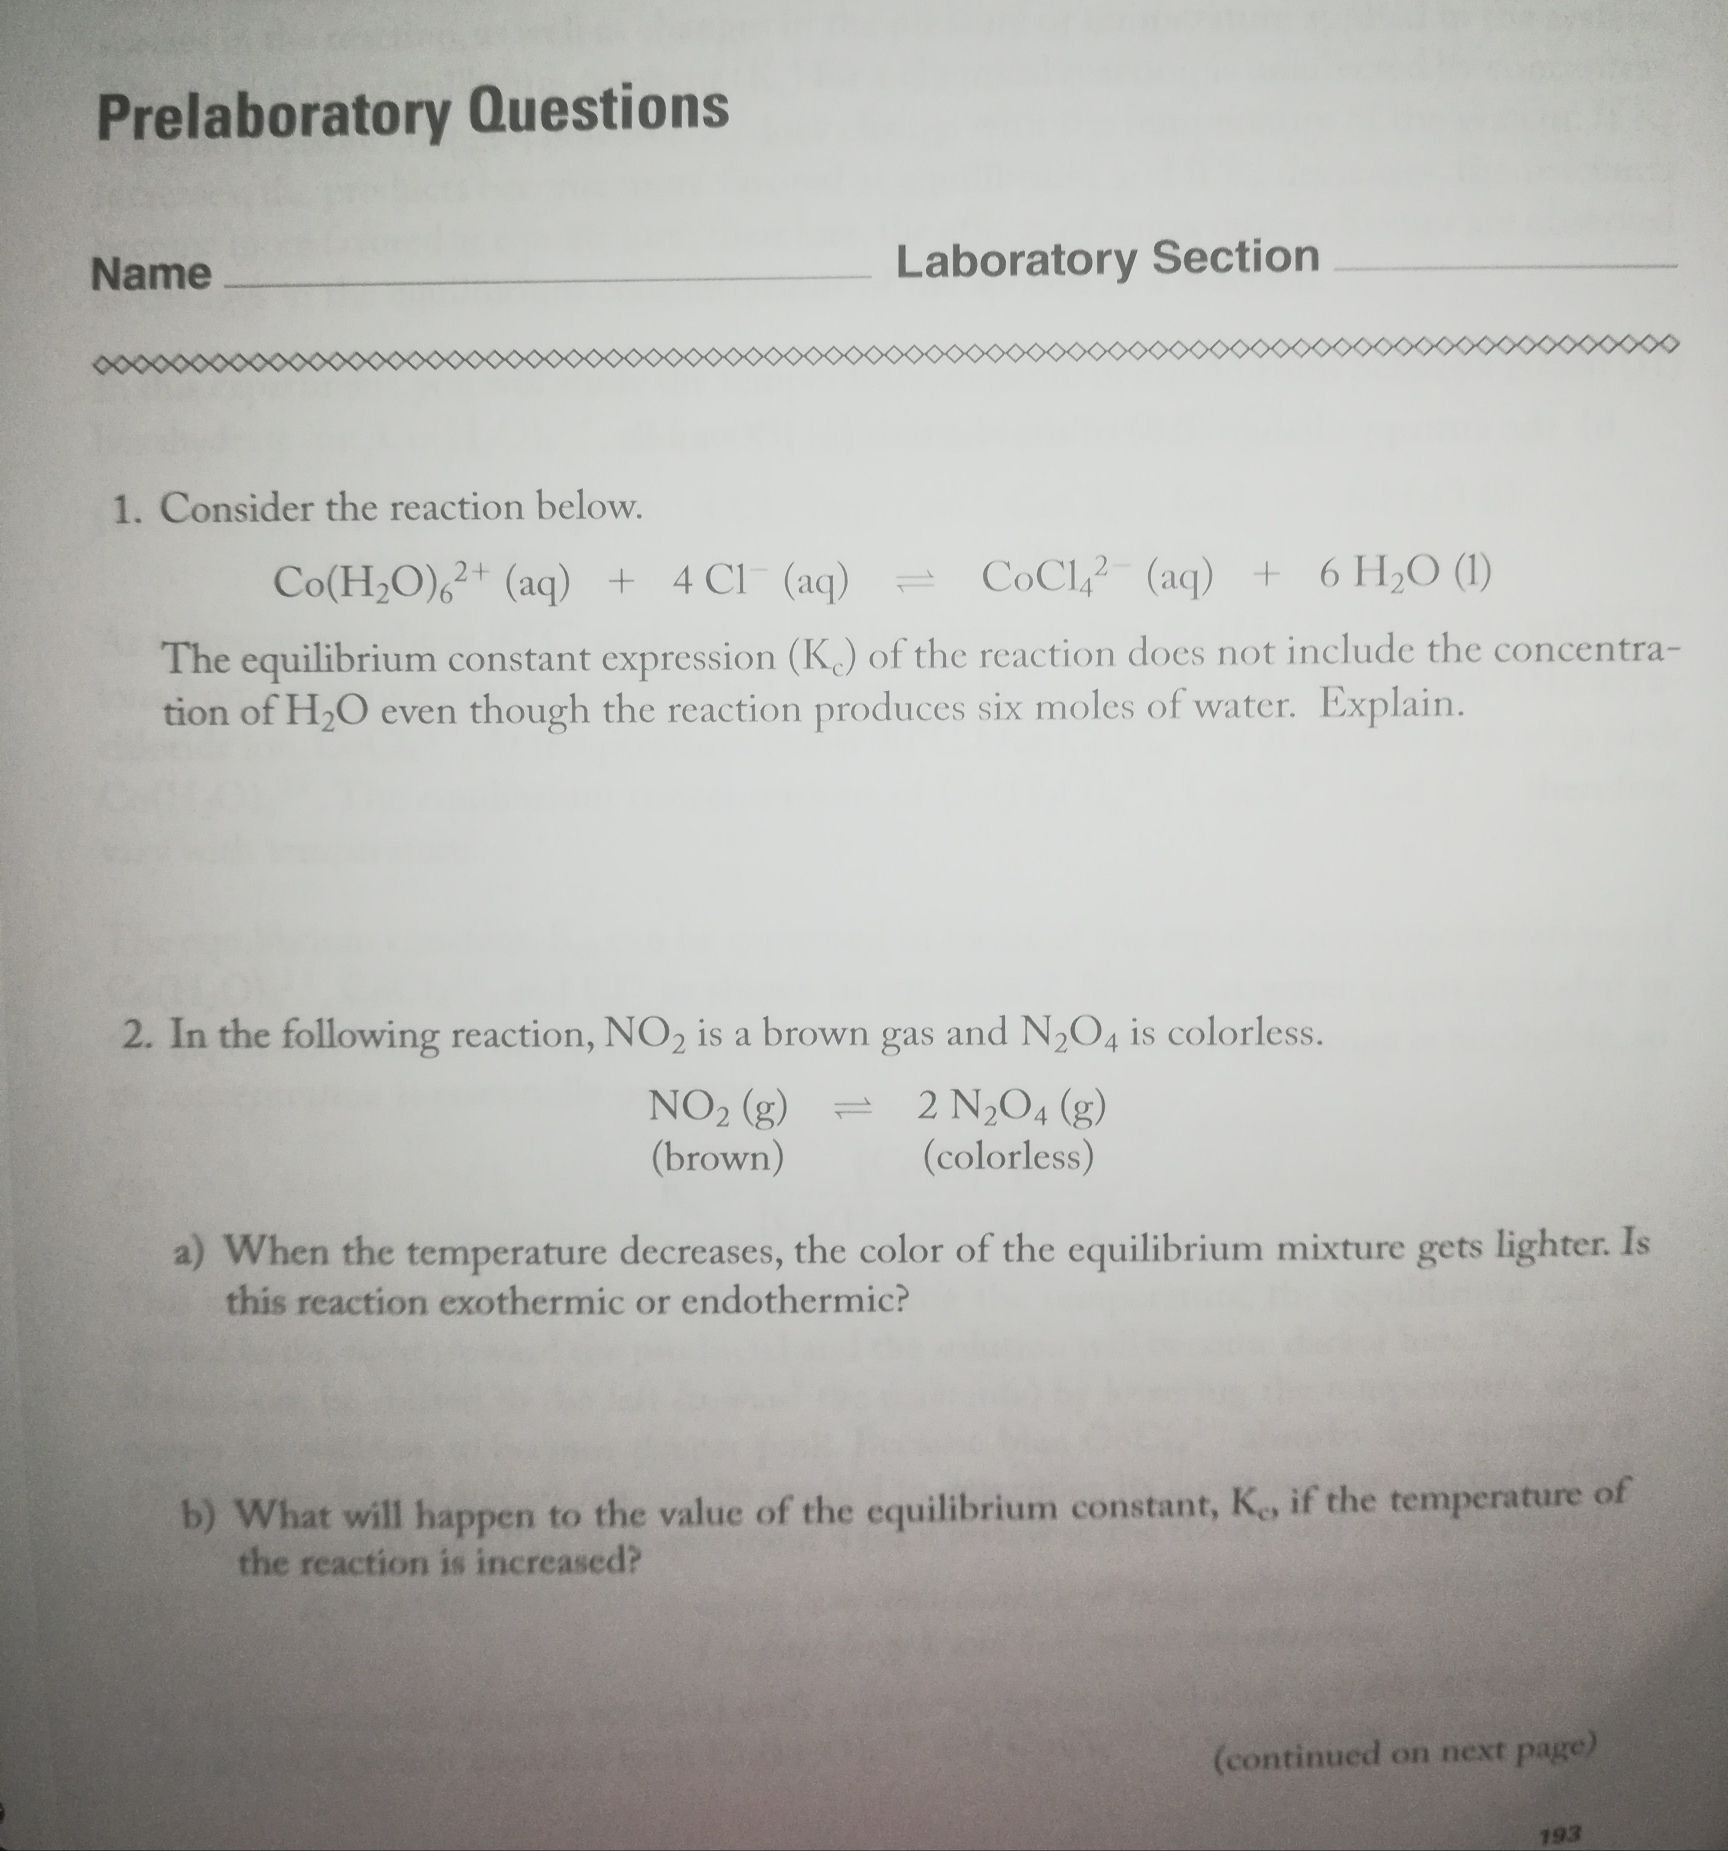 Prelaboratory Questions
Name
Laboratory Section
1. Consider the reaction below.
Co(H;O),?+ (aq) +
4 Cl (aq)
COC1,? (aq) + 6 H2O (1)
The equilibrium constant expression (K) of the reaction does not include the concentra-
tion of H2O even though the reaction produces six moles of water. Explain.
2. In the following reaction, NO2 is a brown gas and N,O4 is colorless.
NO2 (g)
(brown)
= 2 N,O4 (g)
(colorless)
a) When the temperature decreases, the color of the equilibrium mixture gets lighter. Is
this reaction exothermic or endothermic?
b) What will happen to the value of the equilibrium constant, K, if the temperature of
the reaction is increased?
(continued on next page)
193
